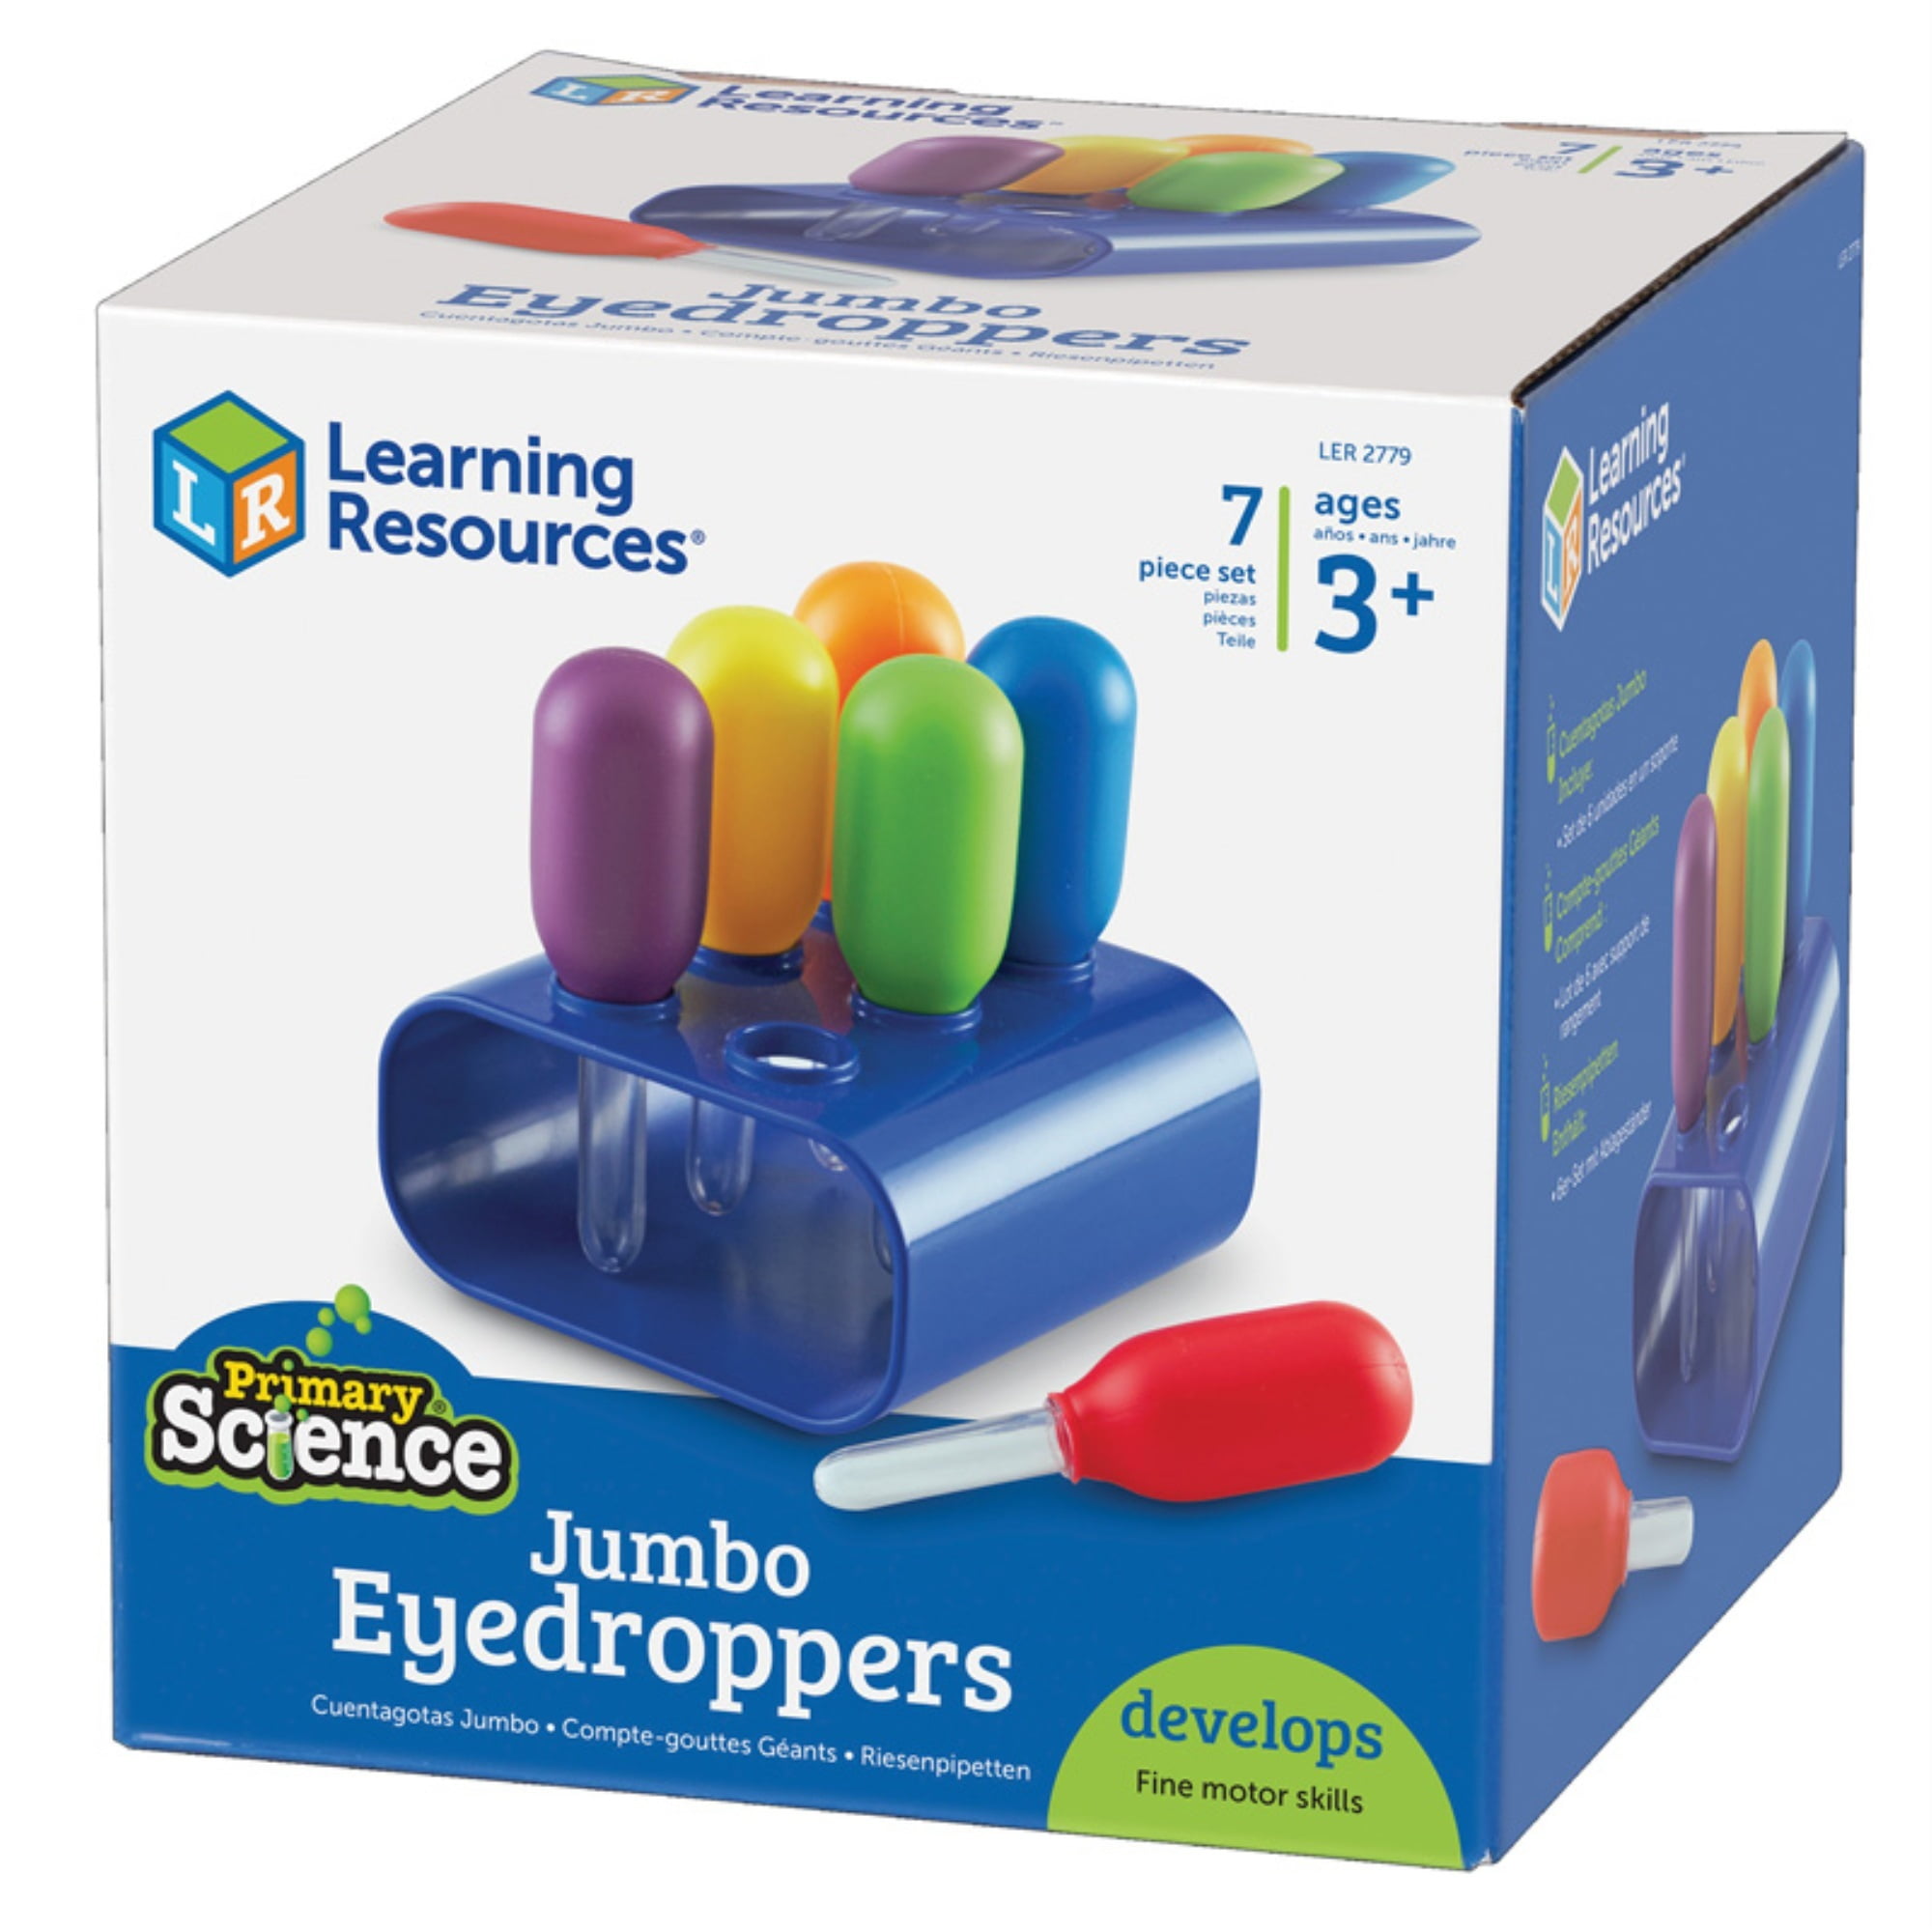 Learning Resources Primary Science Jumbo Eyedroppers w/stand 